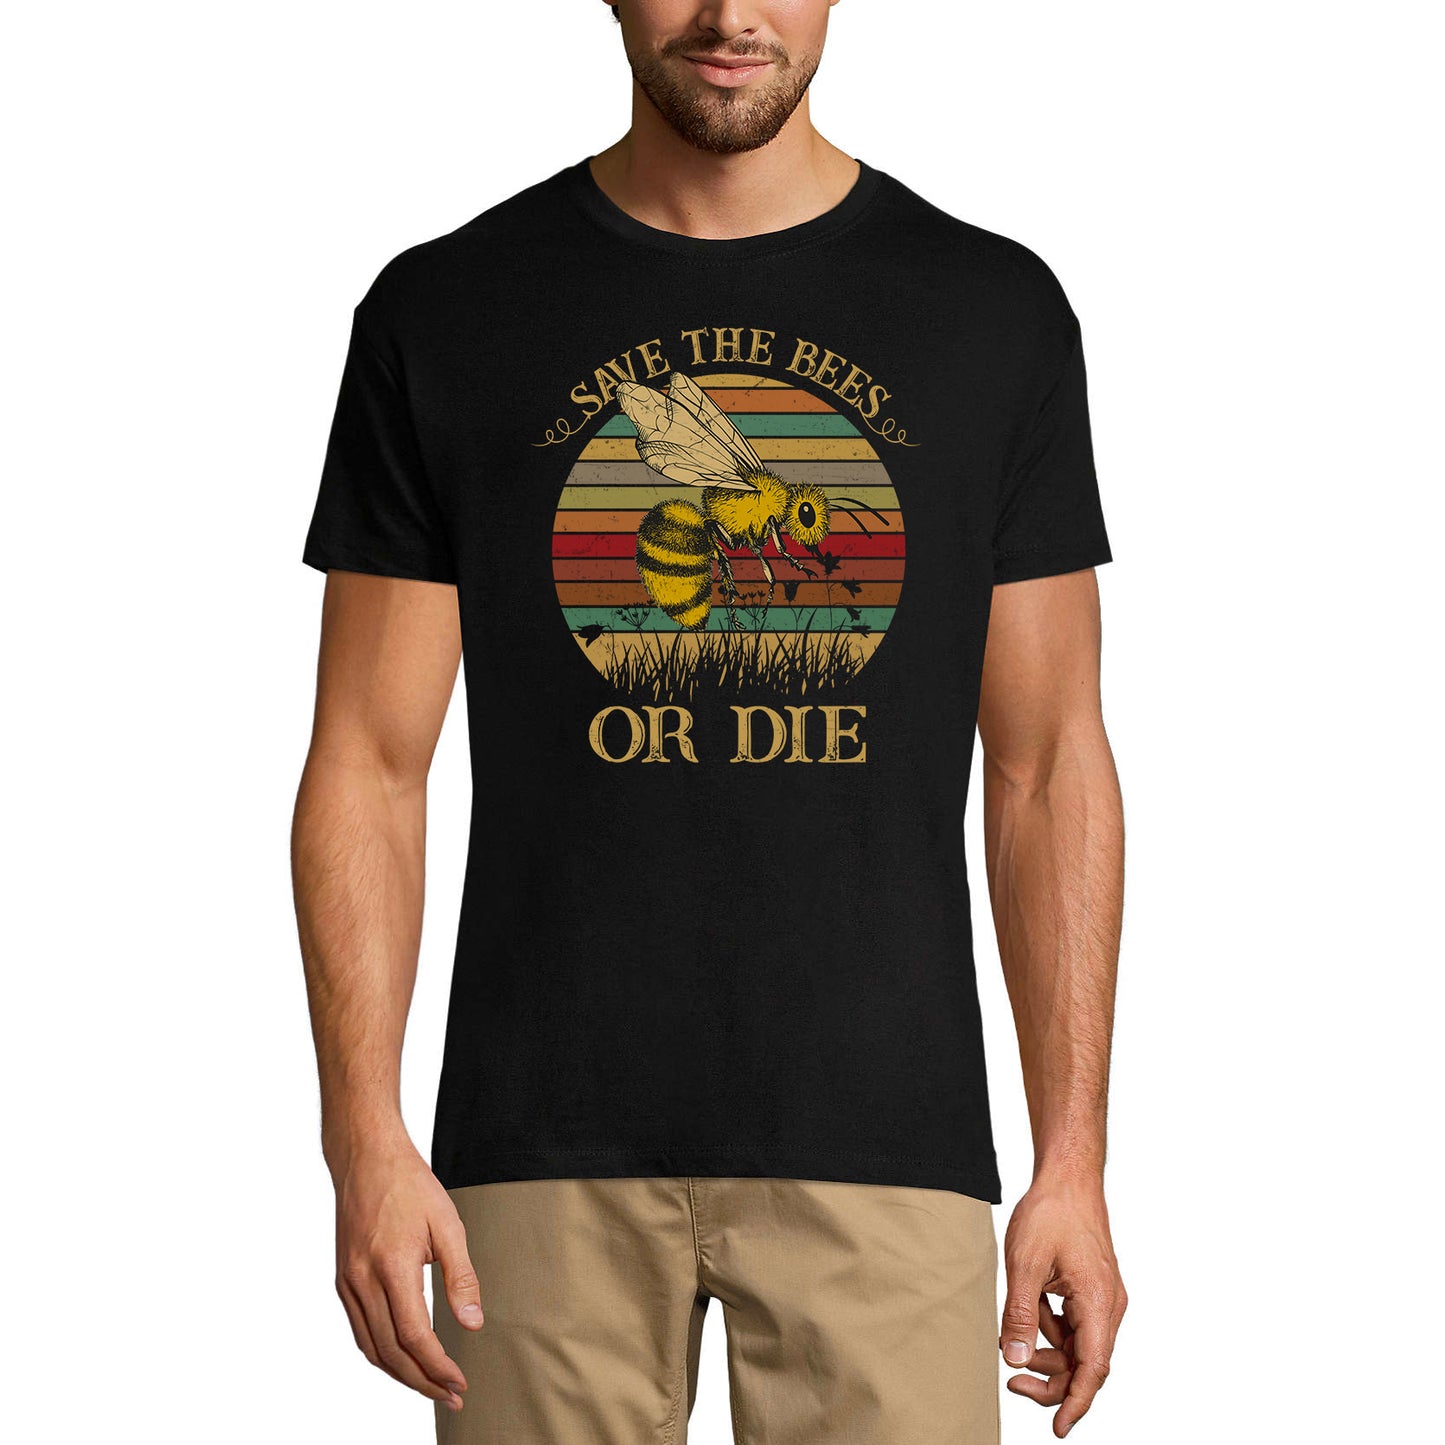 ULTRABASIC Men's Vintage T-Shirt Save the Bees or Die - Funny Retro Tee Shirt